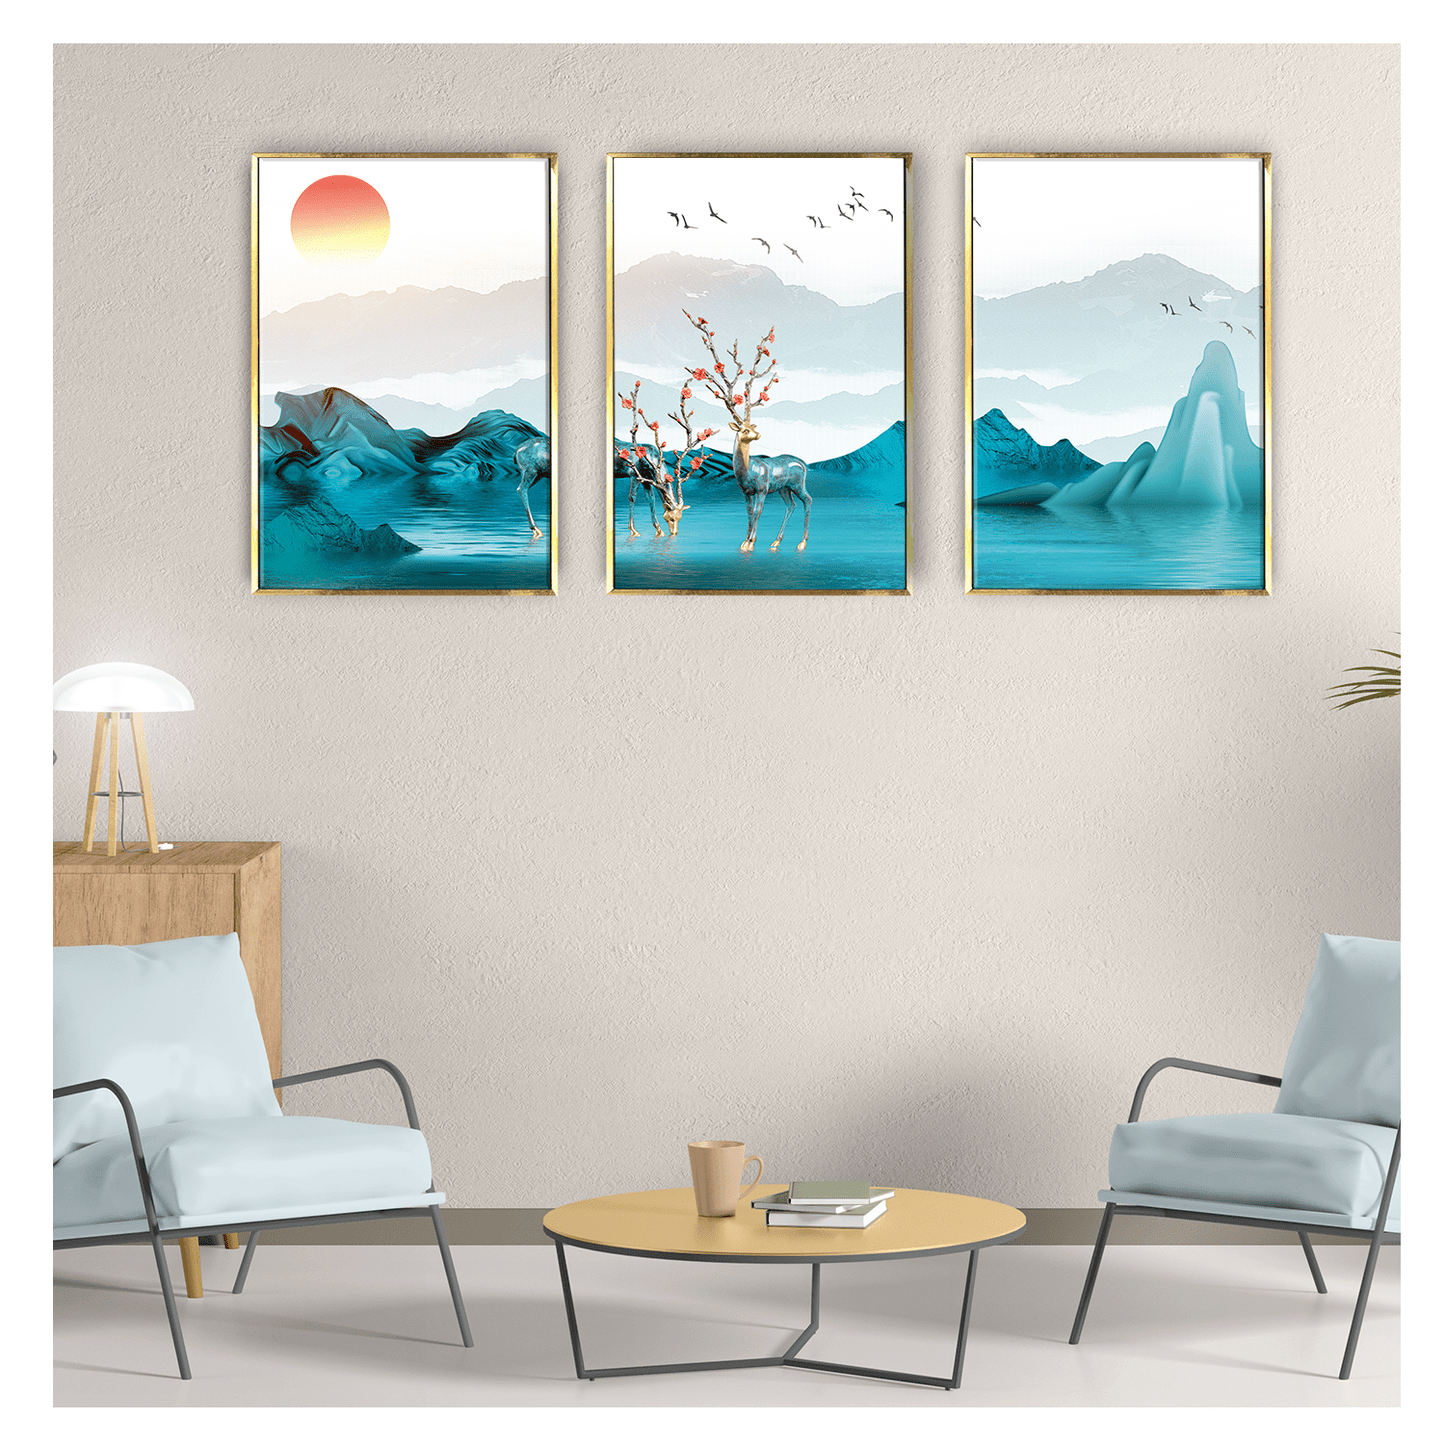 3D Nature painting with deer, stones and tree